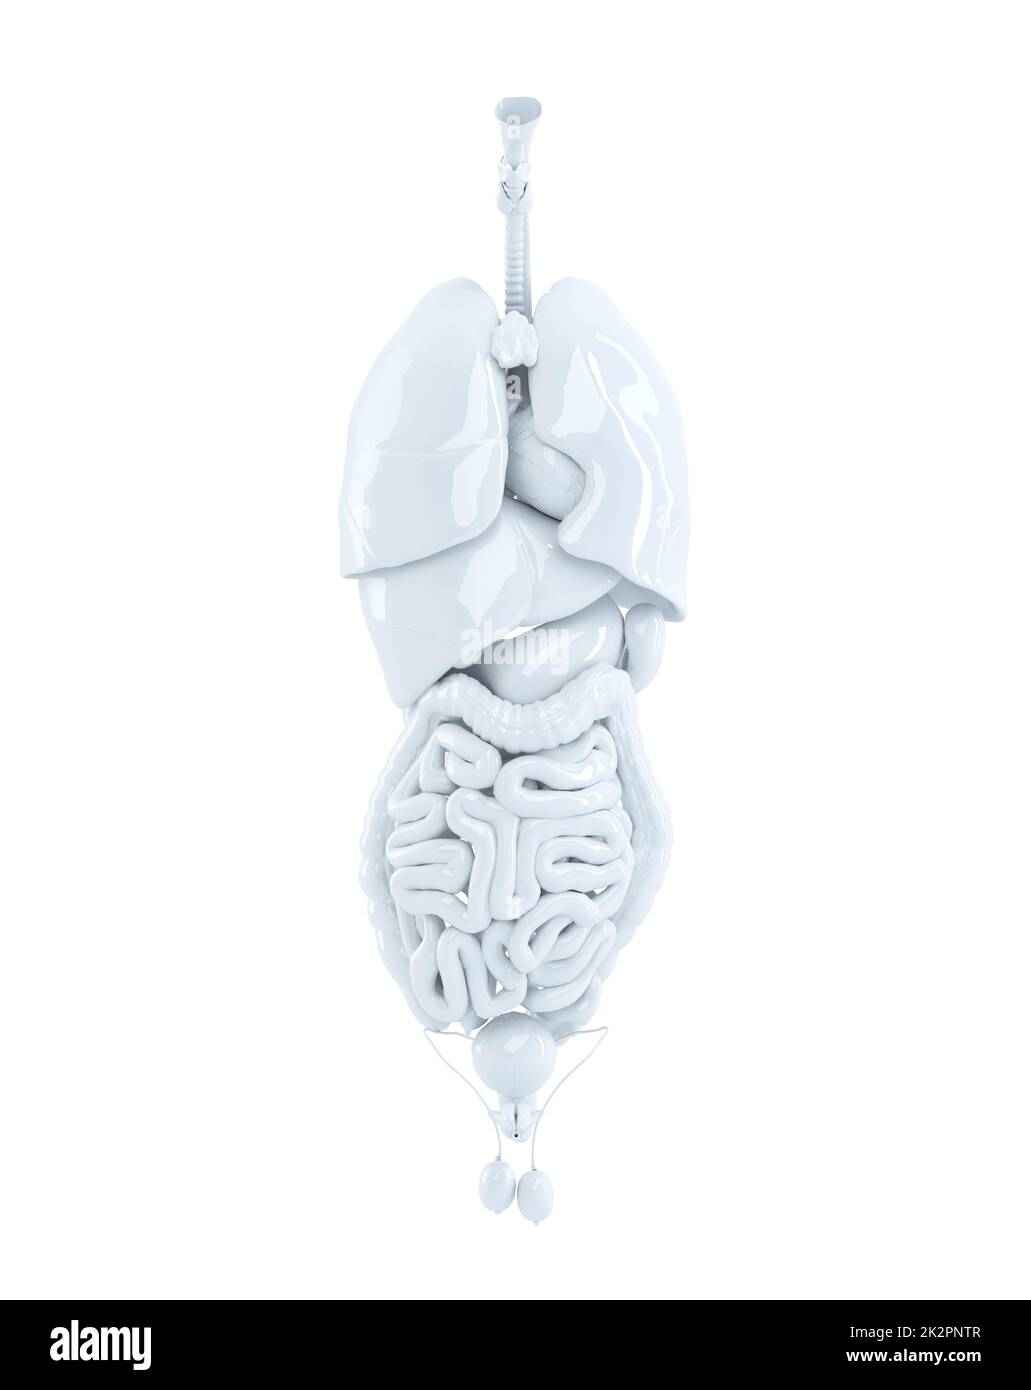 Human internal organs. Isolated. Contains clipping path Stock Photo